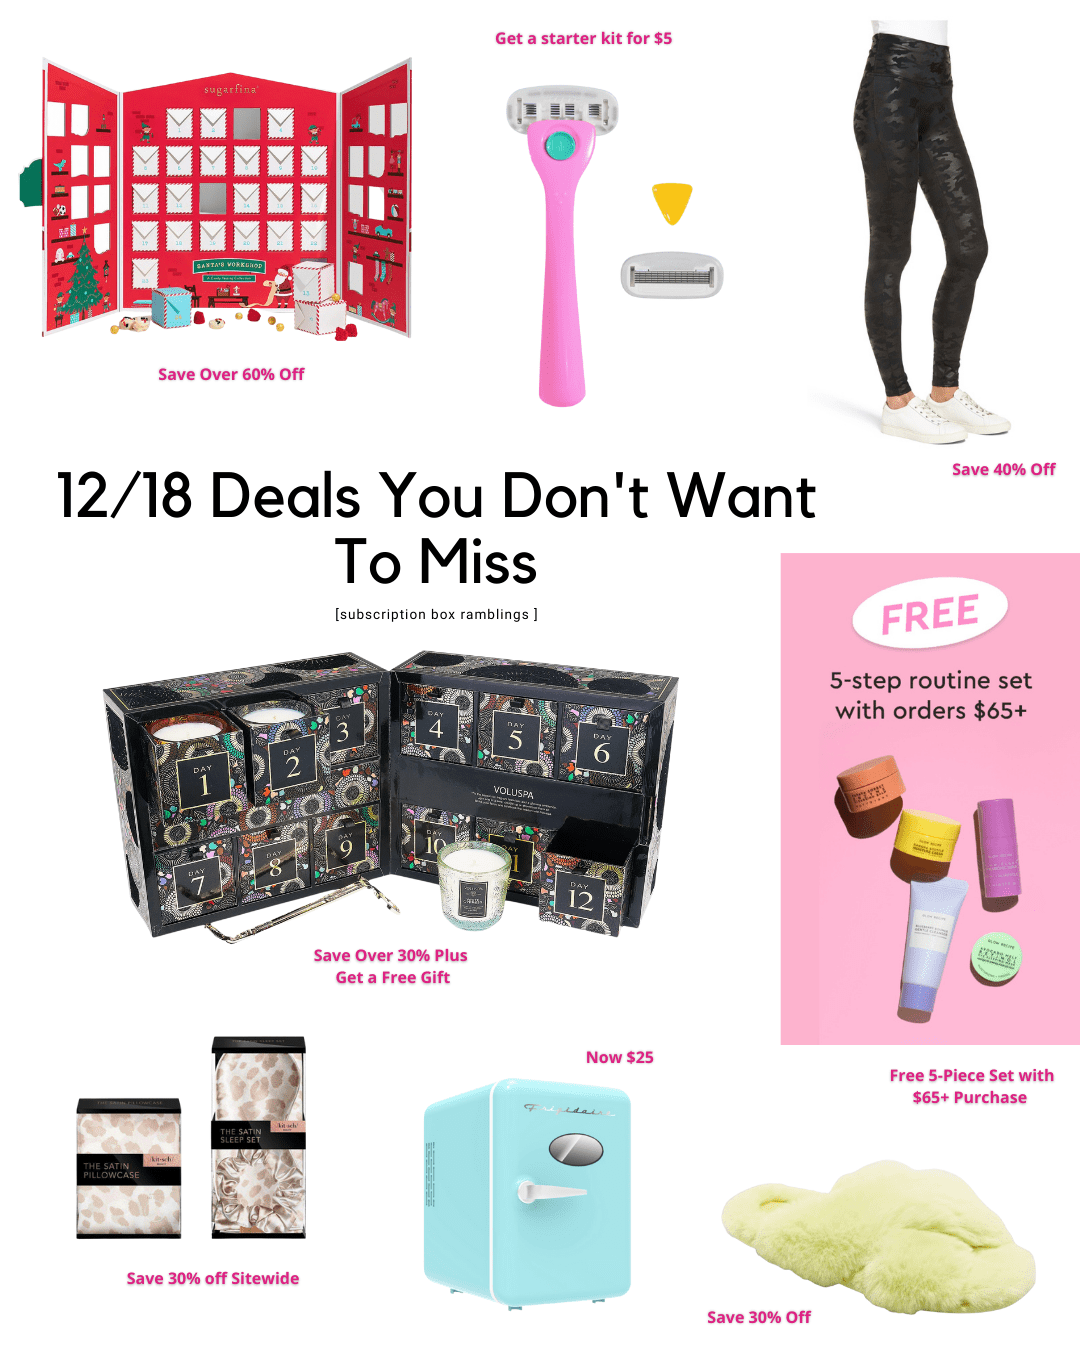 Deals You Don’t Want to Miss – 12/18